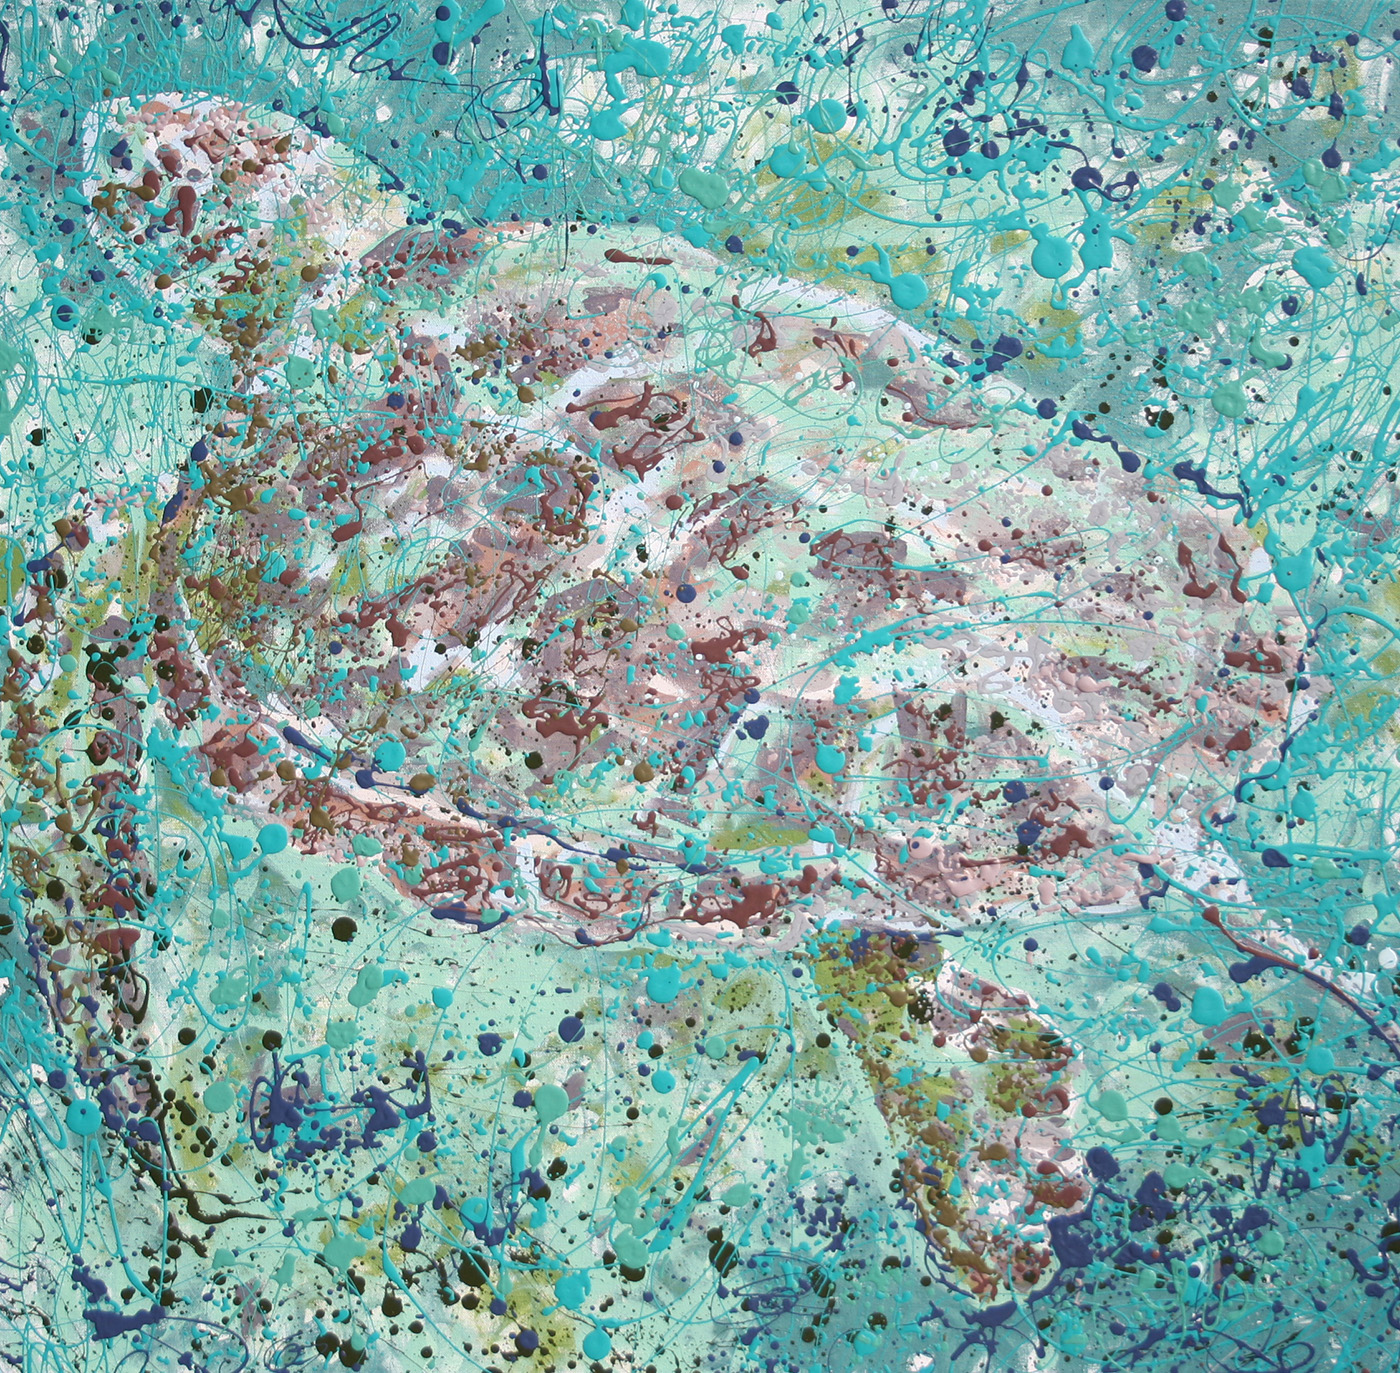 Turtles in Bonaire Latex Enamel Painting on Gallery Wrapped Canvas by Fort Collins, Colorado Artist Lisa Cameron Russell